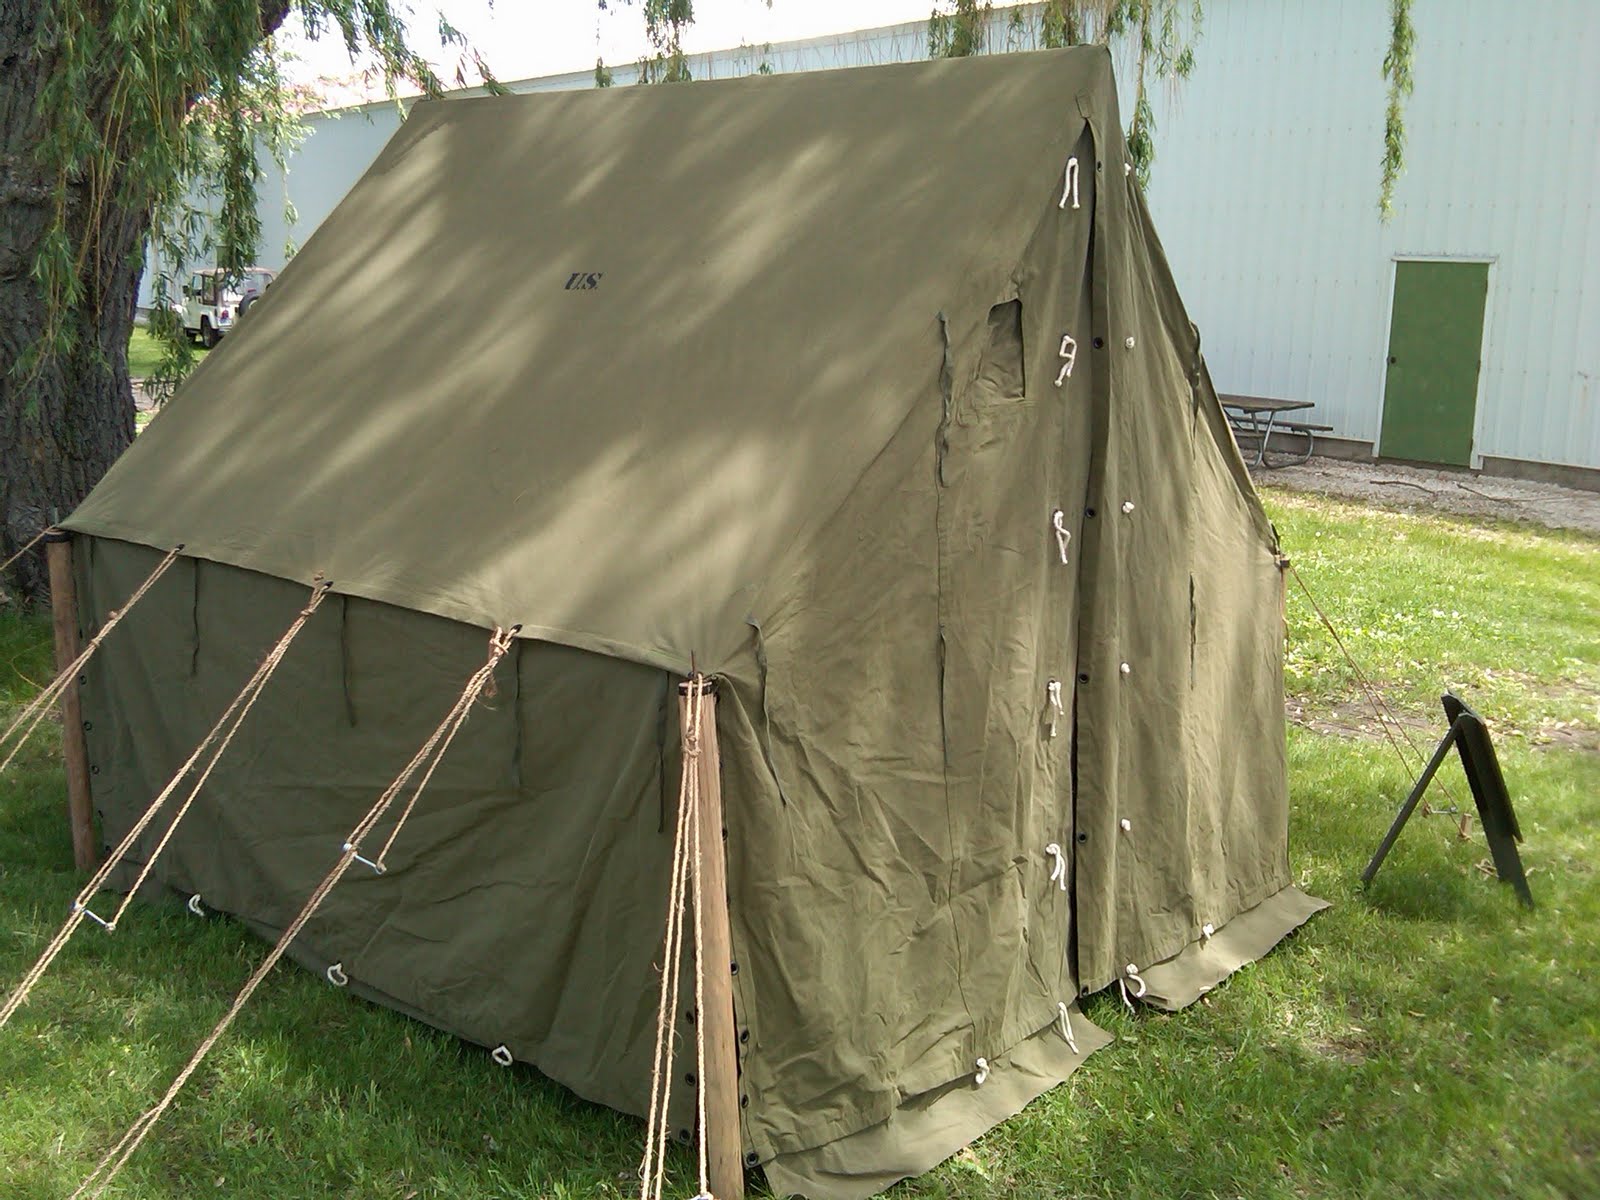 World War II (WWII) Tent at Anzio Express Event